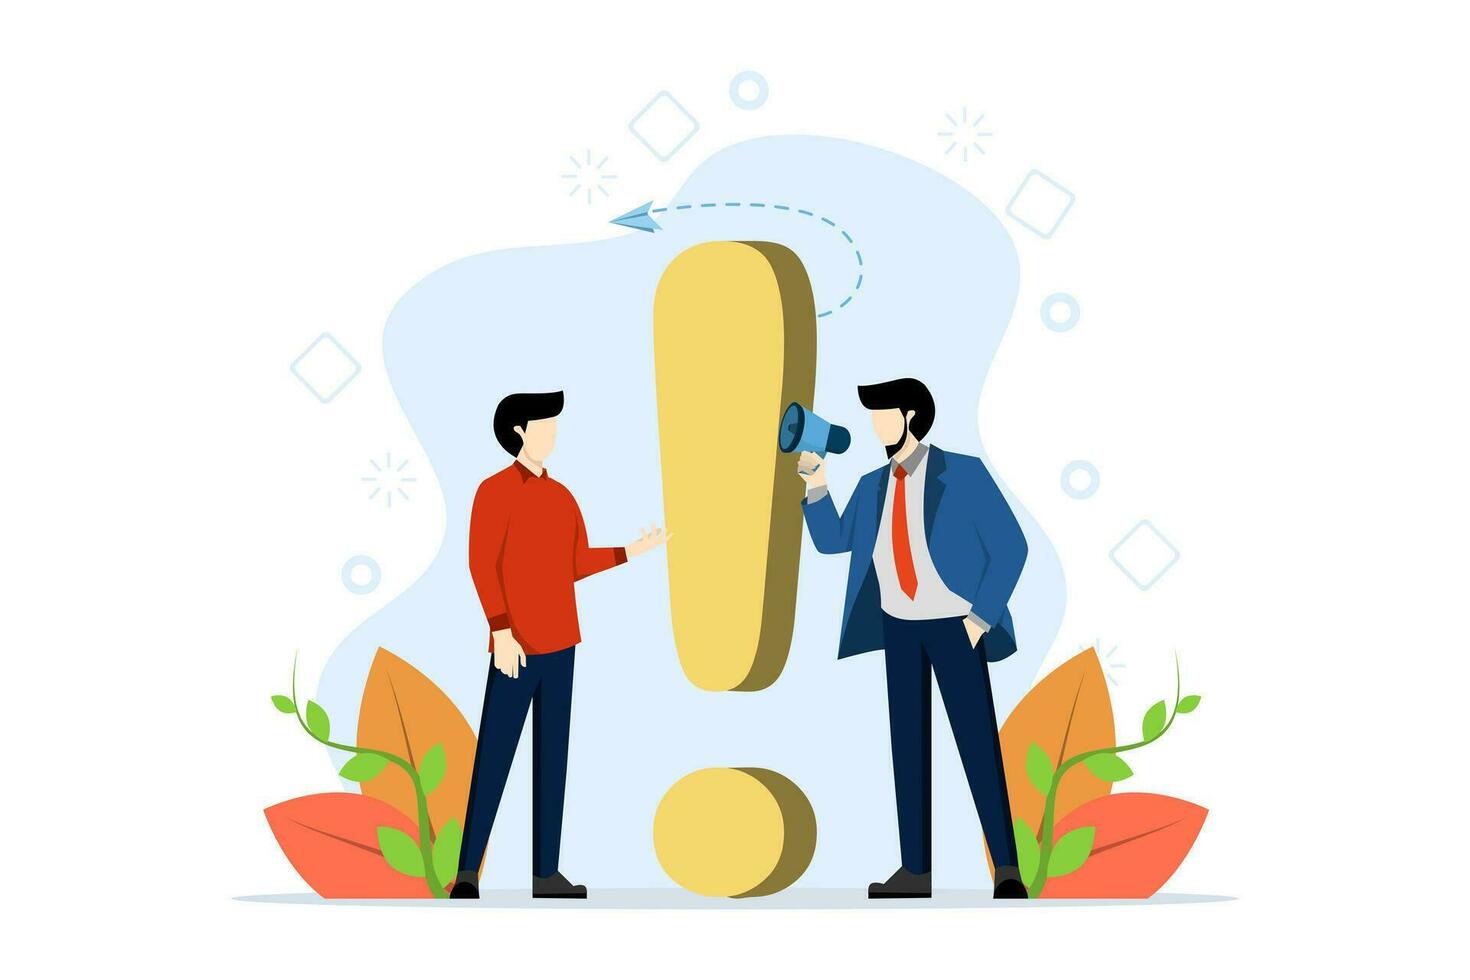 frequently asked questions concept illustration, waiting to be answered, customer service. around exclamation marks, answers to metaphorical questions. Flat vector illustration on a white background.